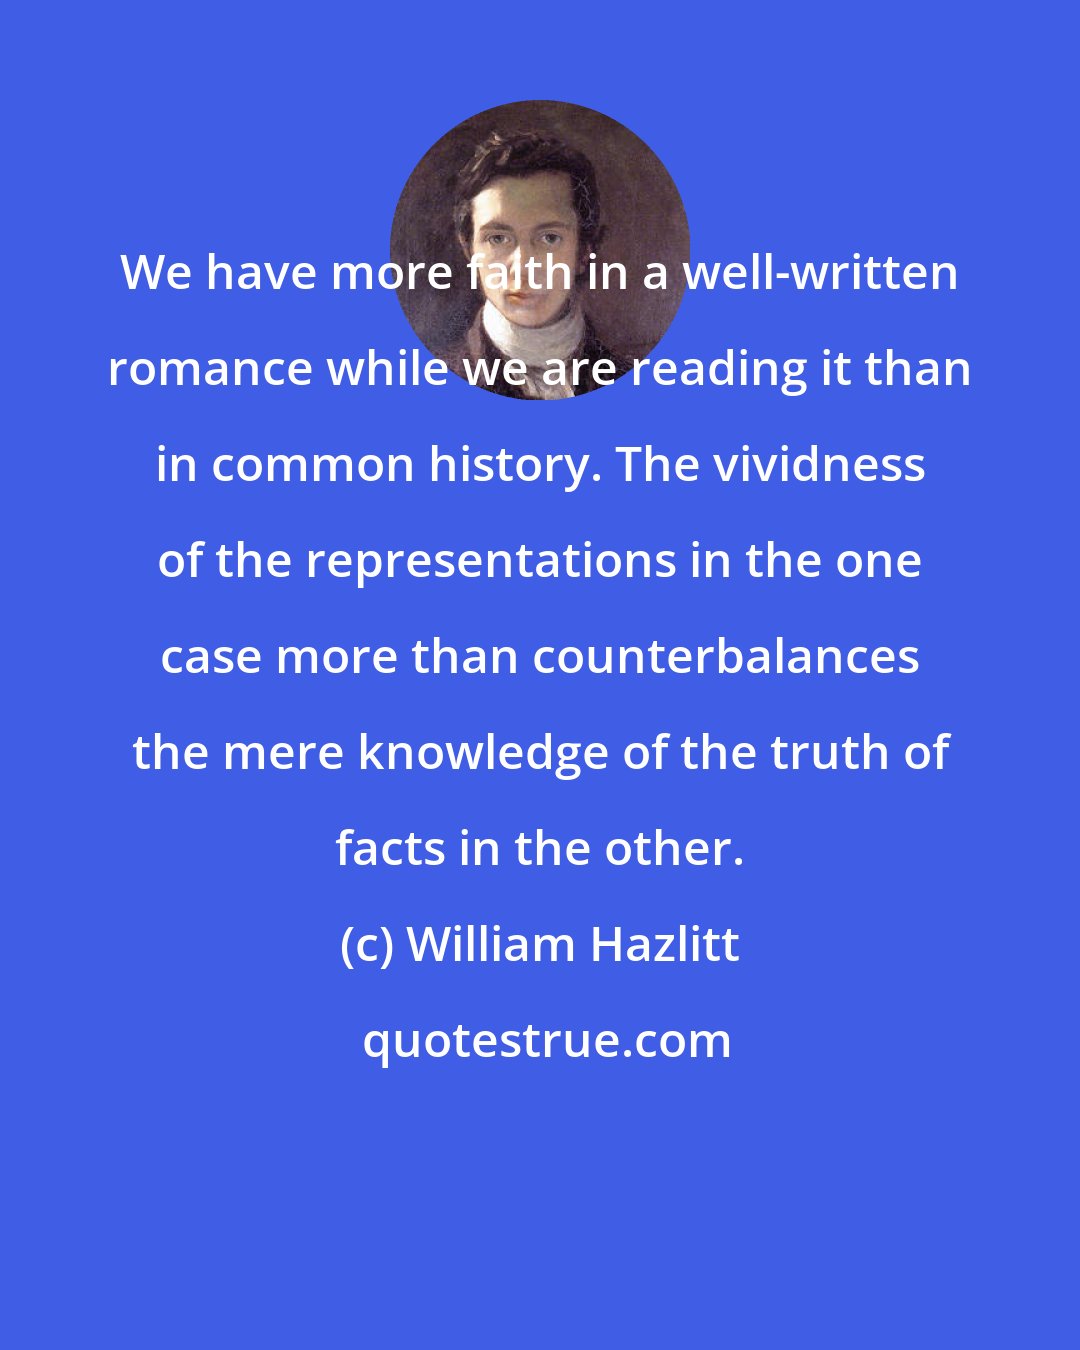 William Hazlitt: We have more faith in a well-written romance while we are reading it than in common history. The vividness of the representations in the one case more than counterbalances the mere knowledge of the truth of facts in the other.